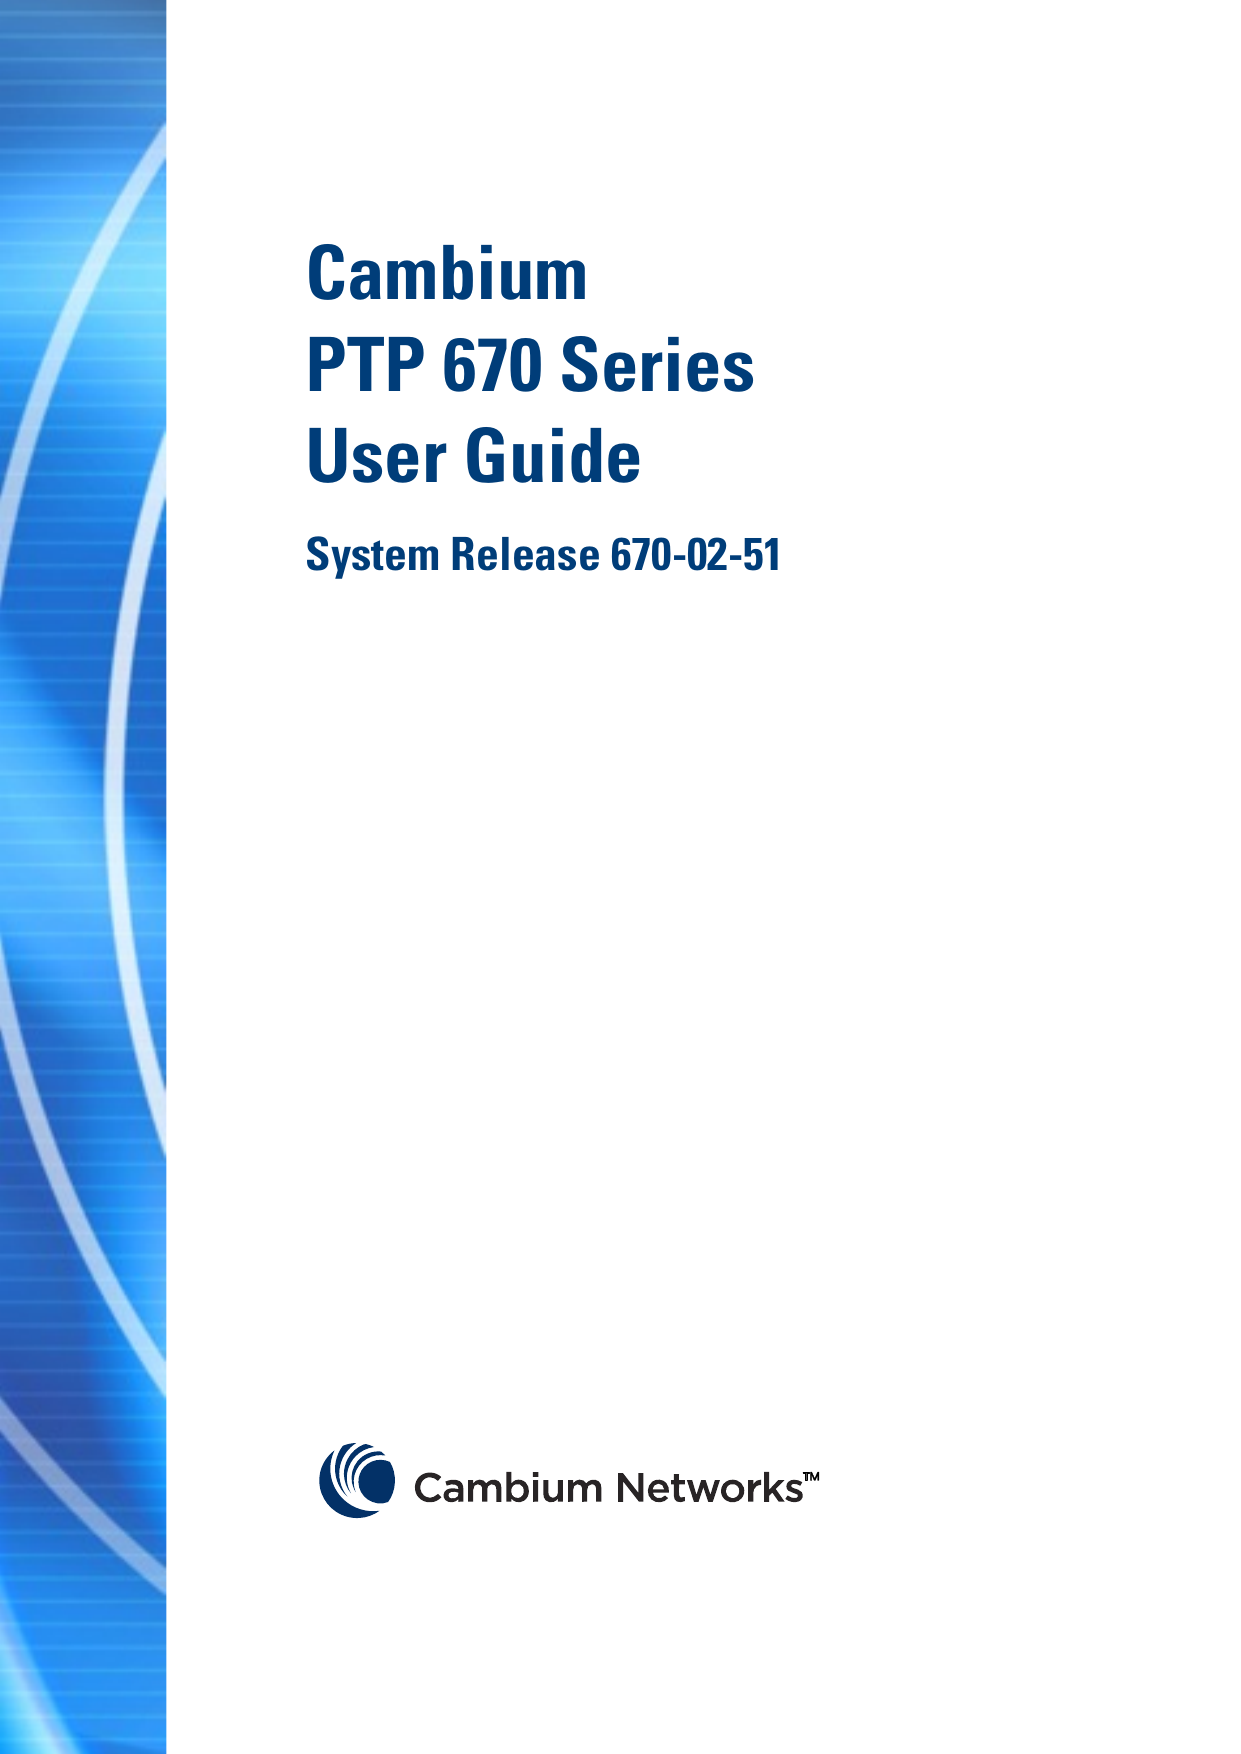  F  Cambium  PTP 670 Series  User Guide System Release 670-02-51                      